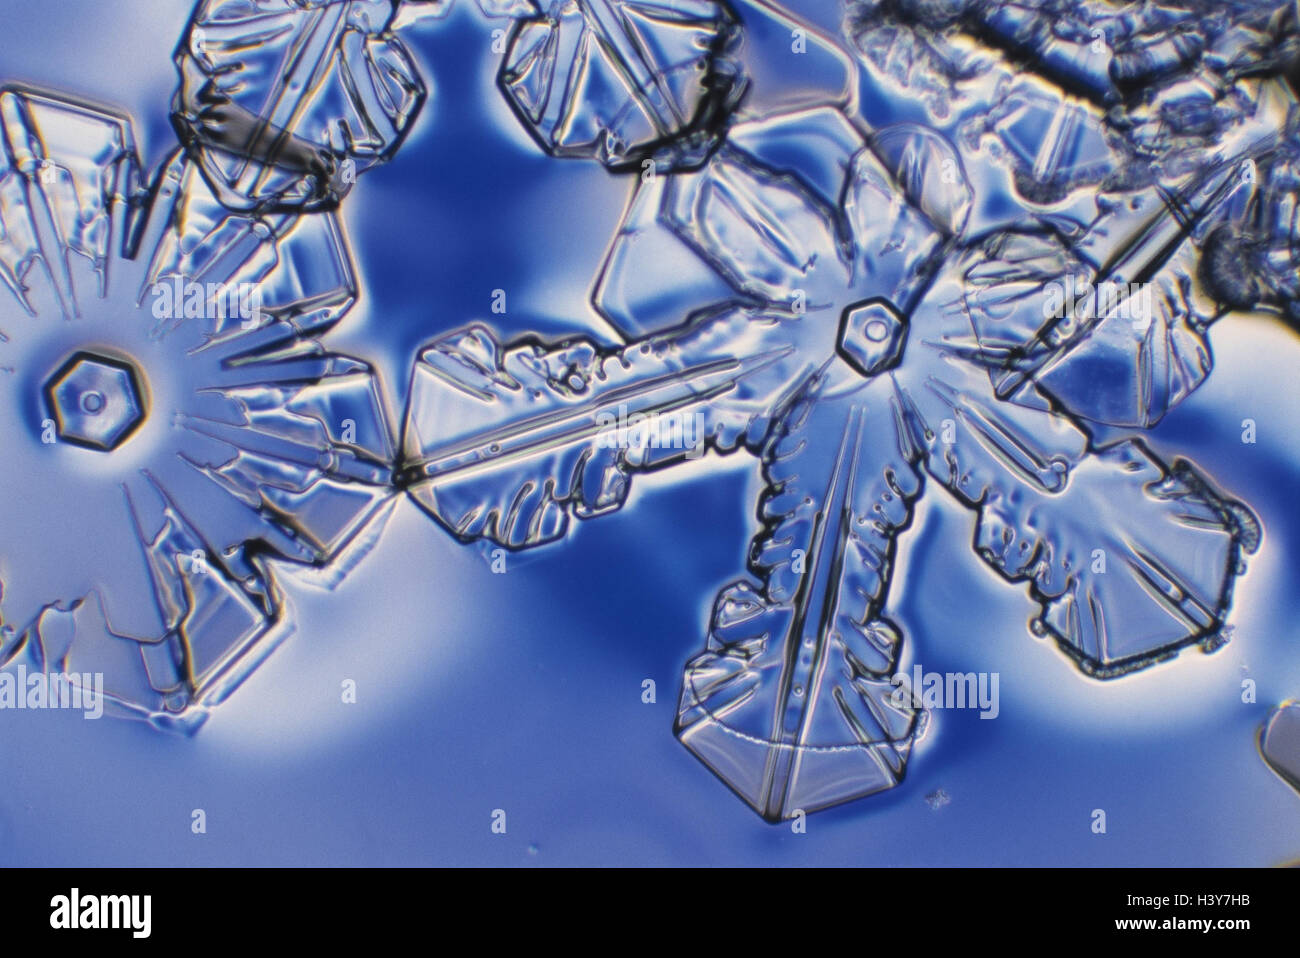 ice crystal images